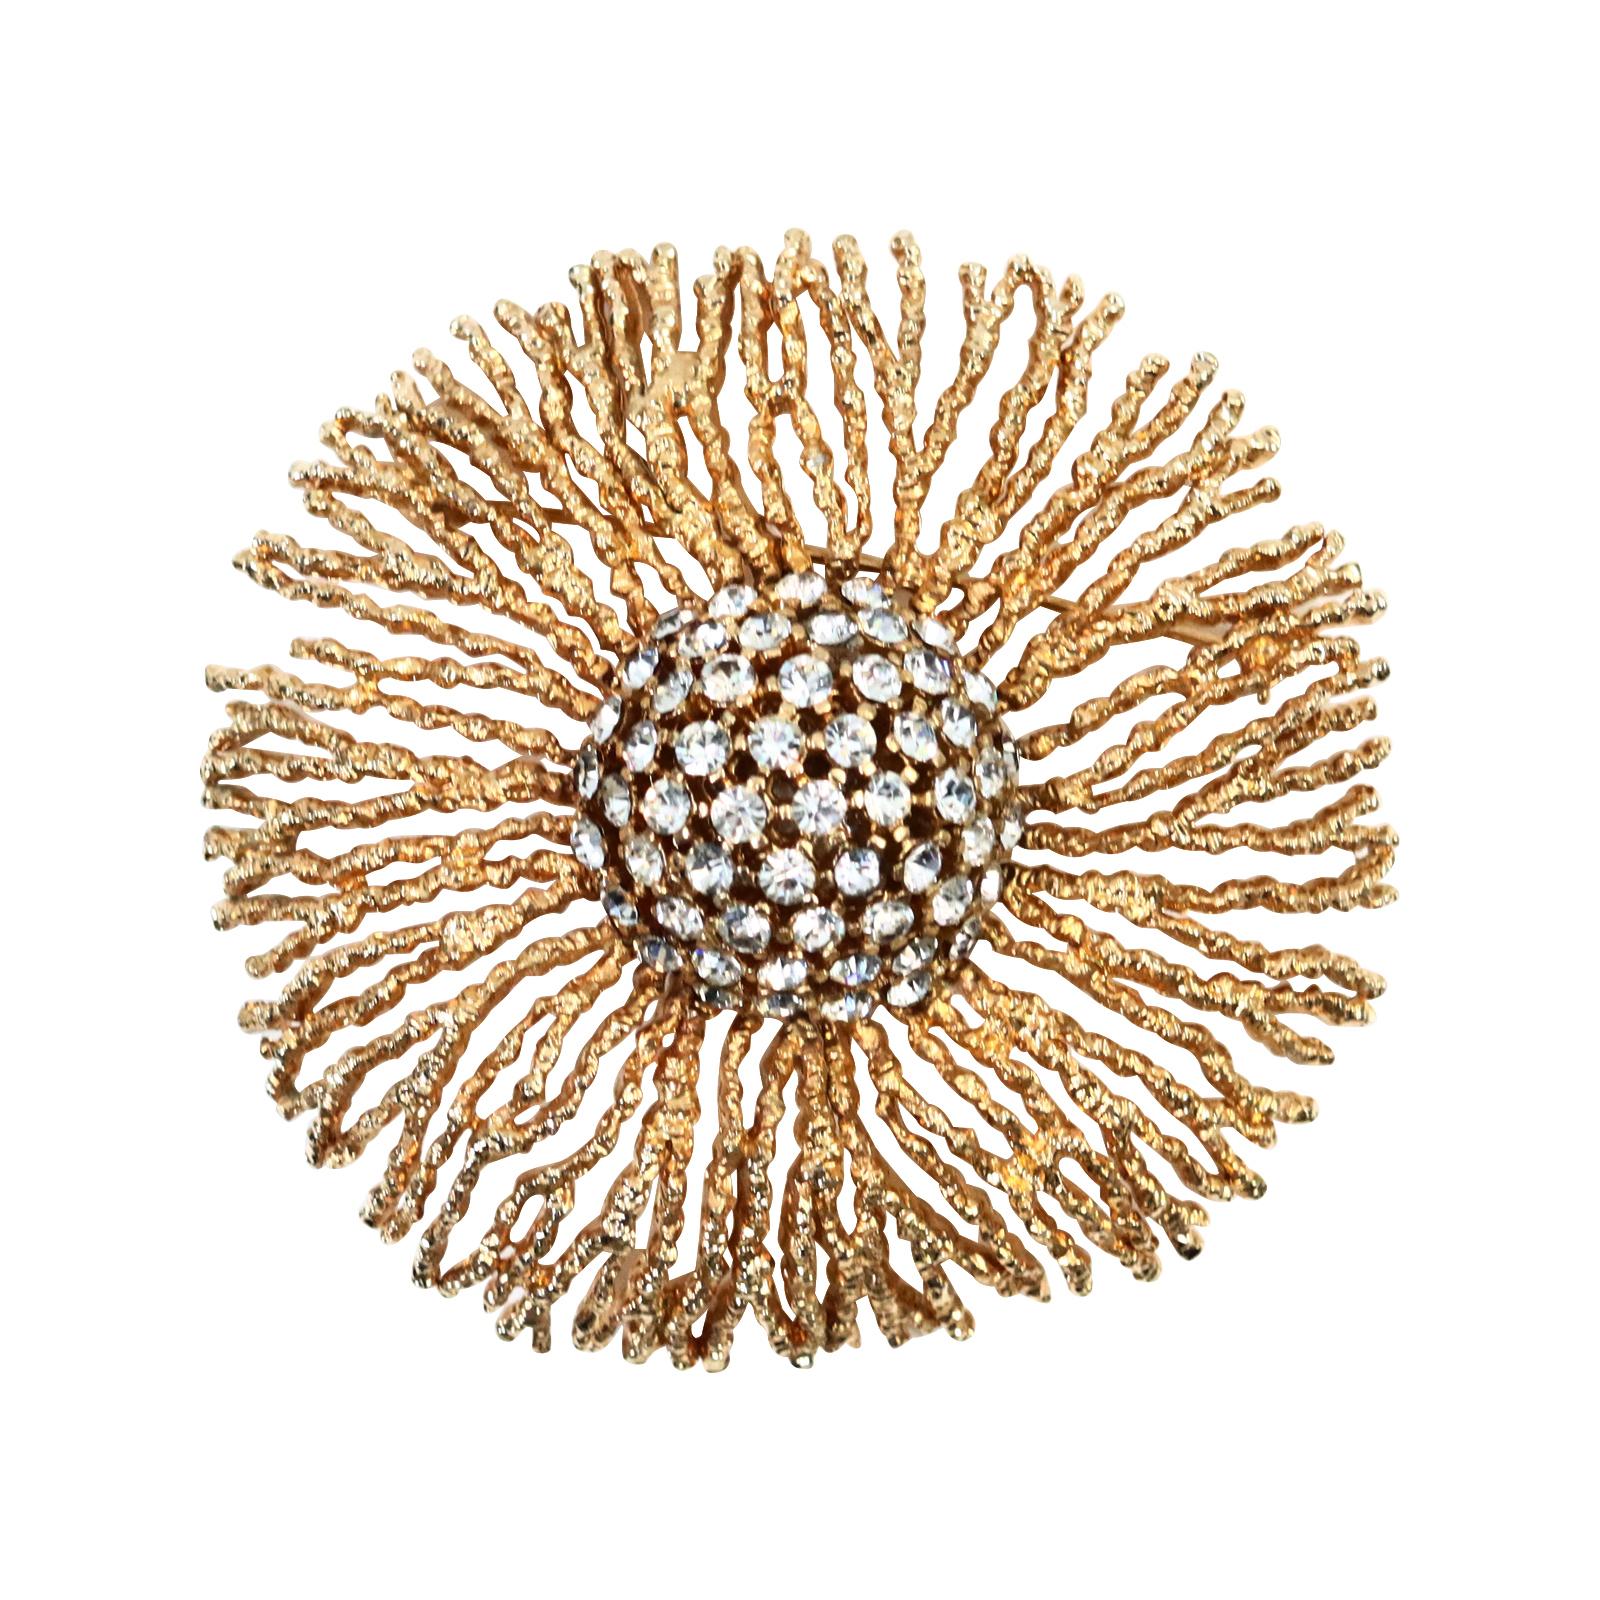 Vintage Boucher Gold and Diamante Brooch Circa 1960s. This brooch is like  a free form gold piece with a pave ball of diamante on top. I have this one myself in my collection.  I wear it with a black silk cord which I will happily give you if you